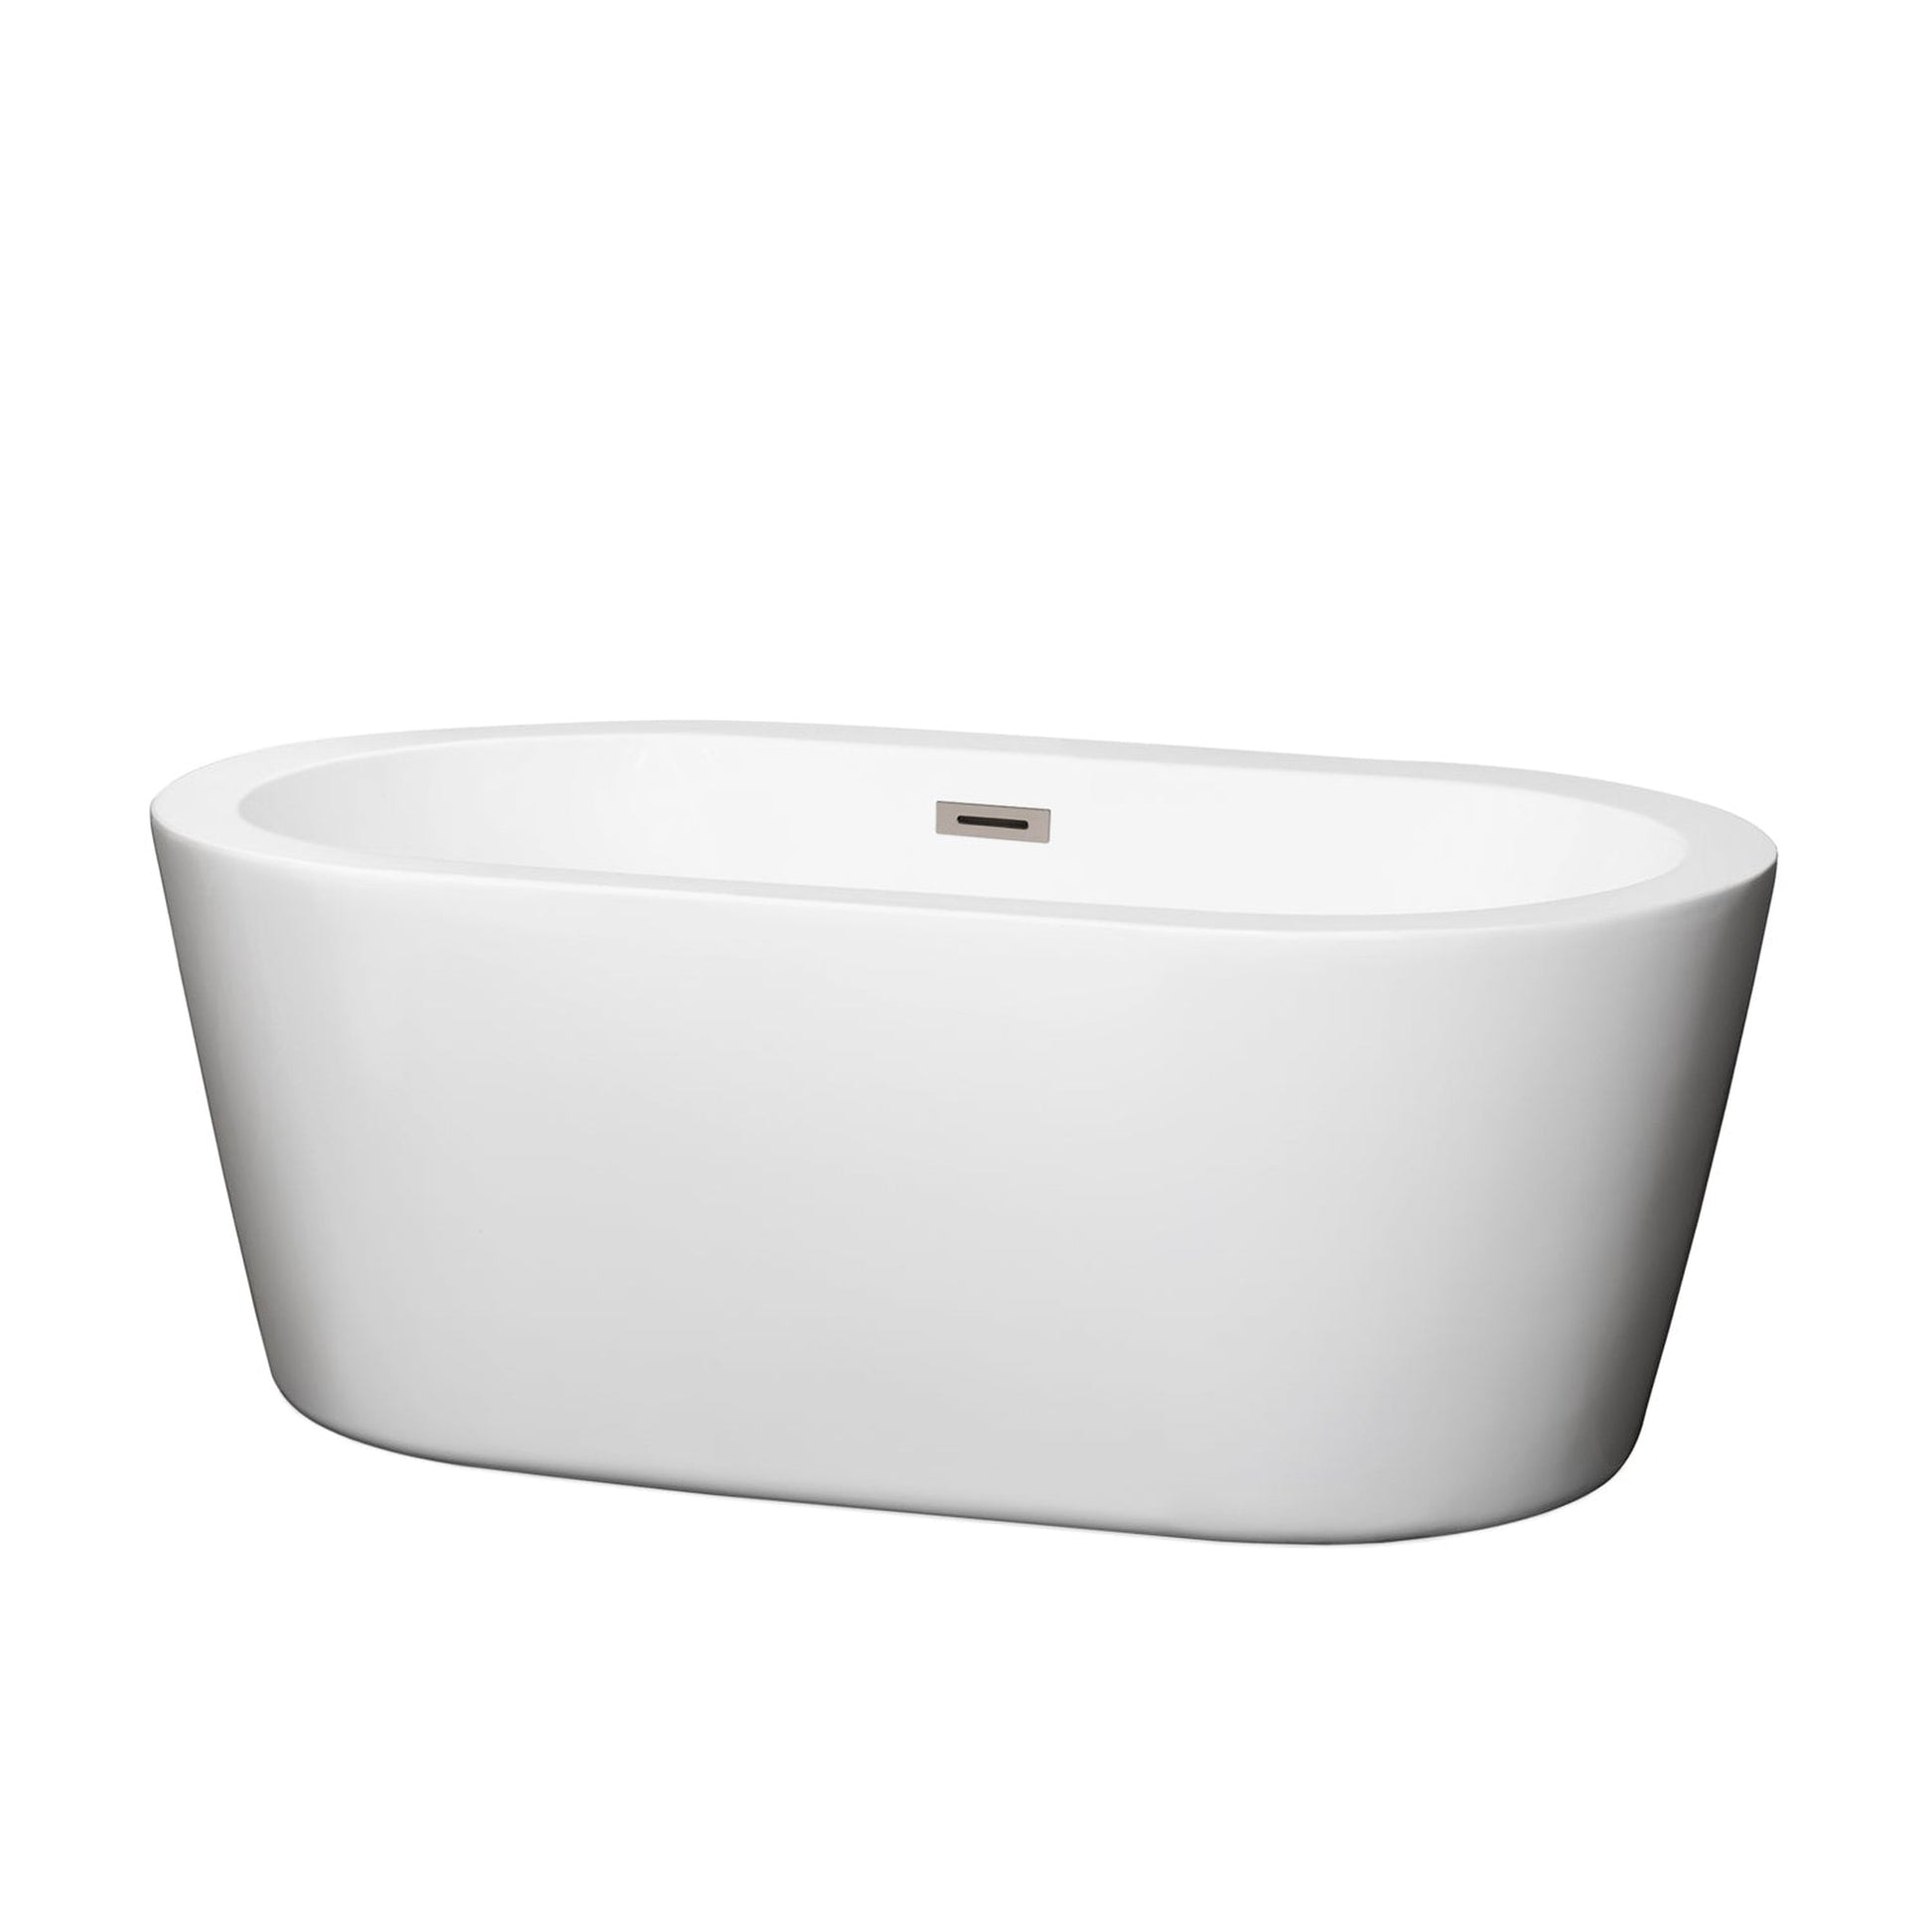 Wyndham Collection Mermaid 60" Freestanding Bathtub in White With Brushed Nickel Drain and Overflow Trim